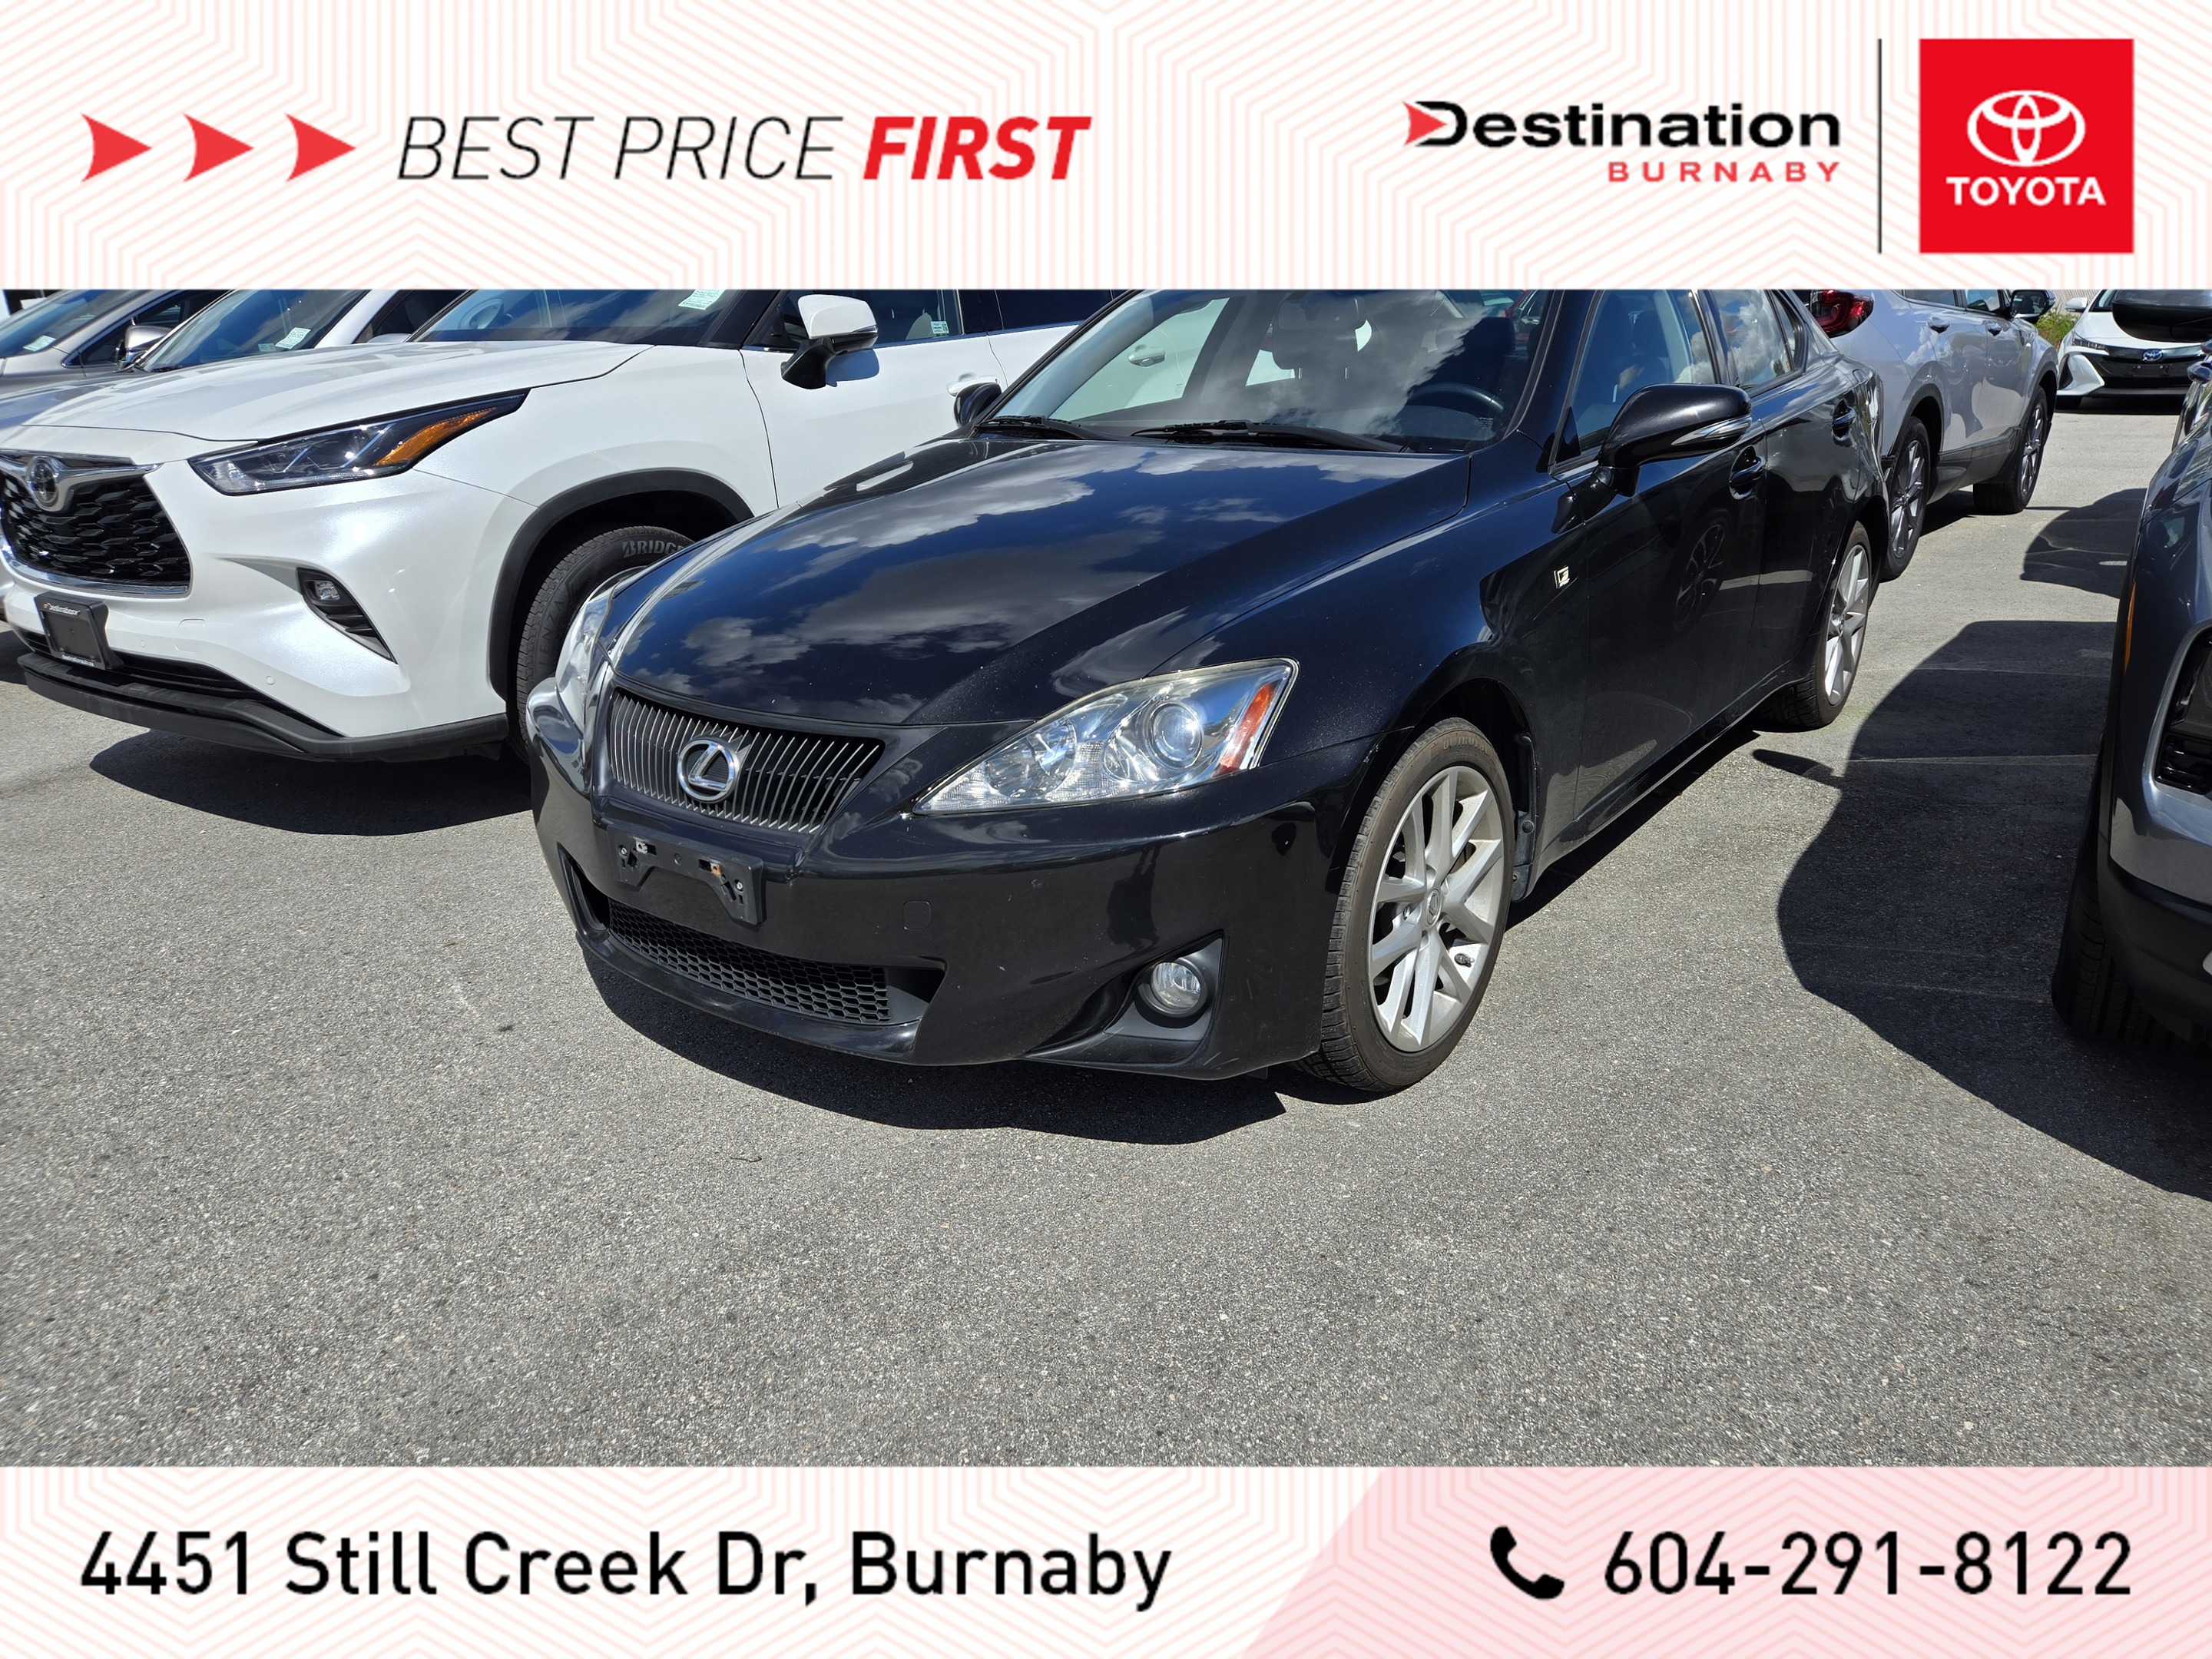 2012 Lexus IS 250 AWD V6 Leather w/ Moonroof Pack - Local, Loaded!